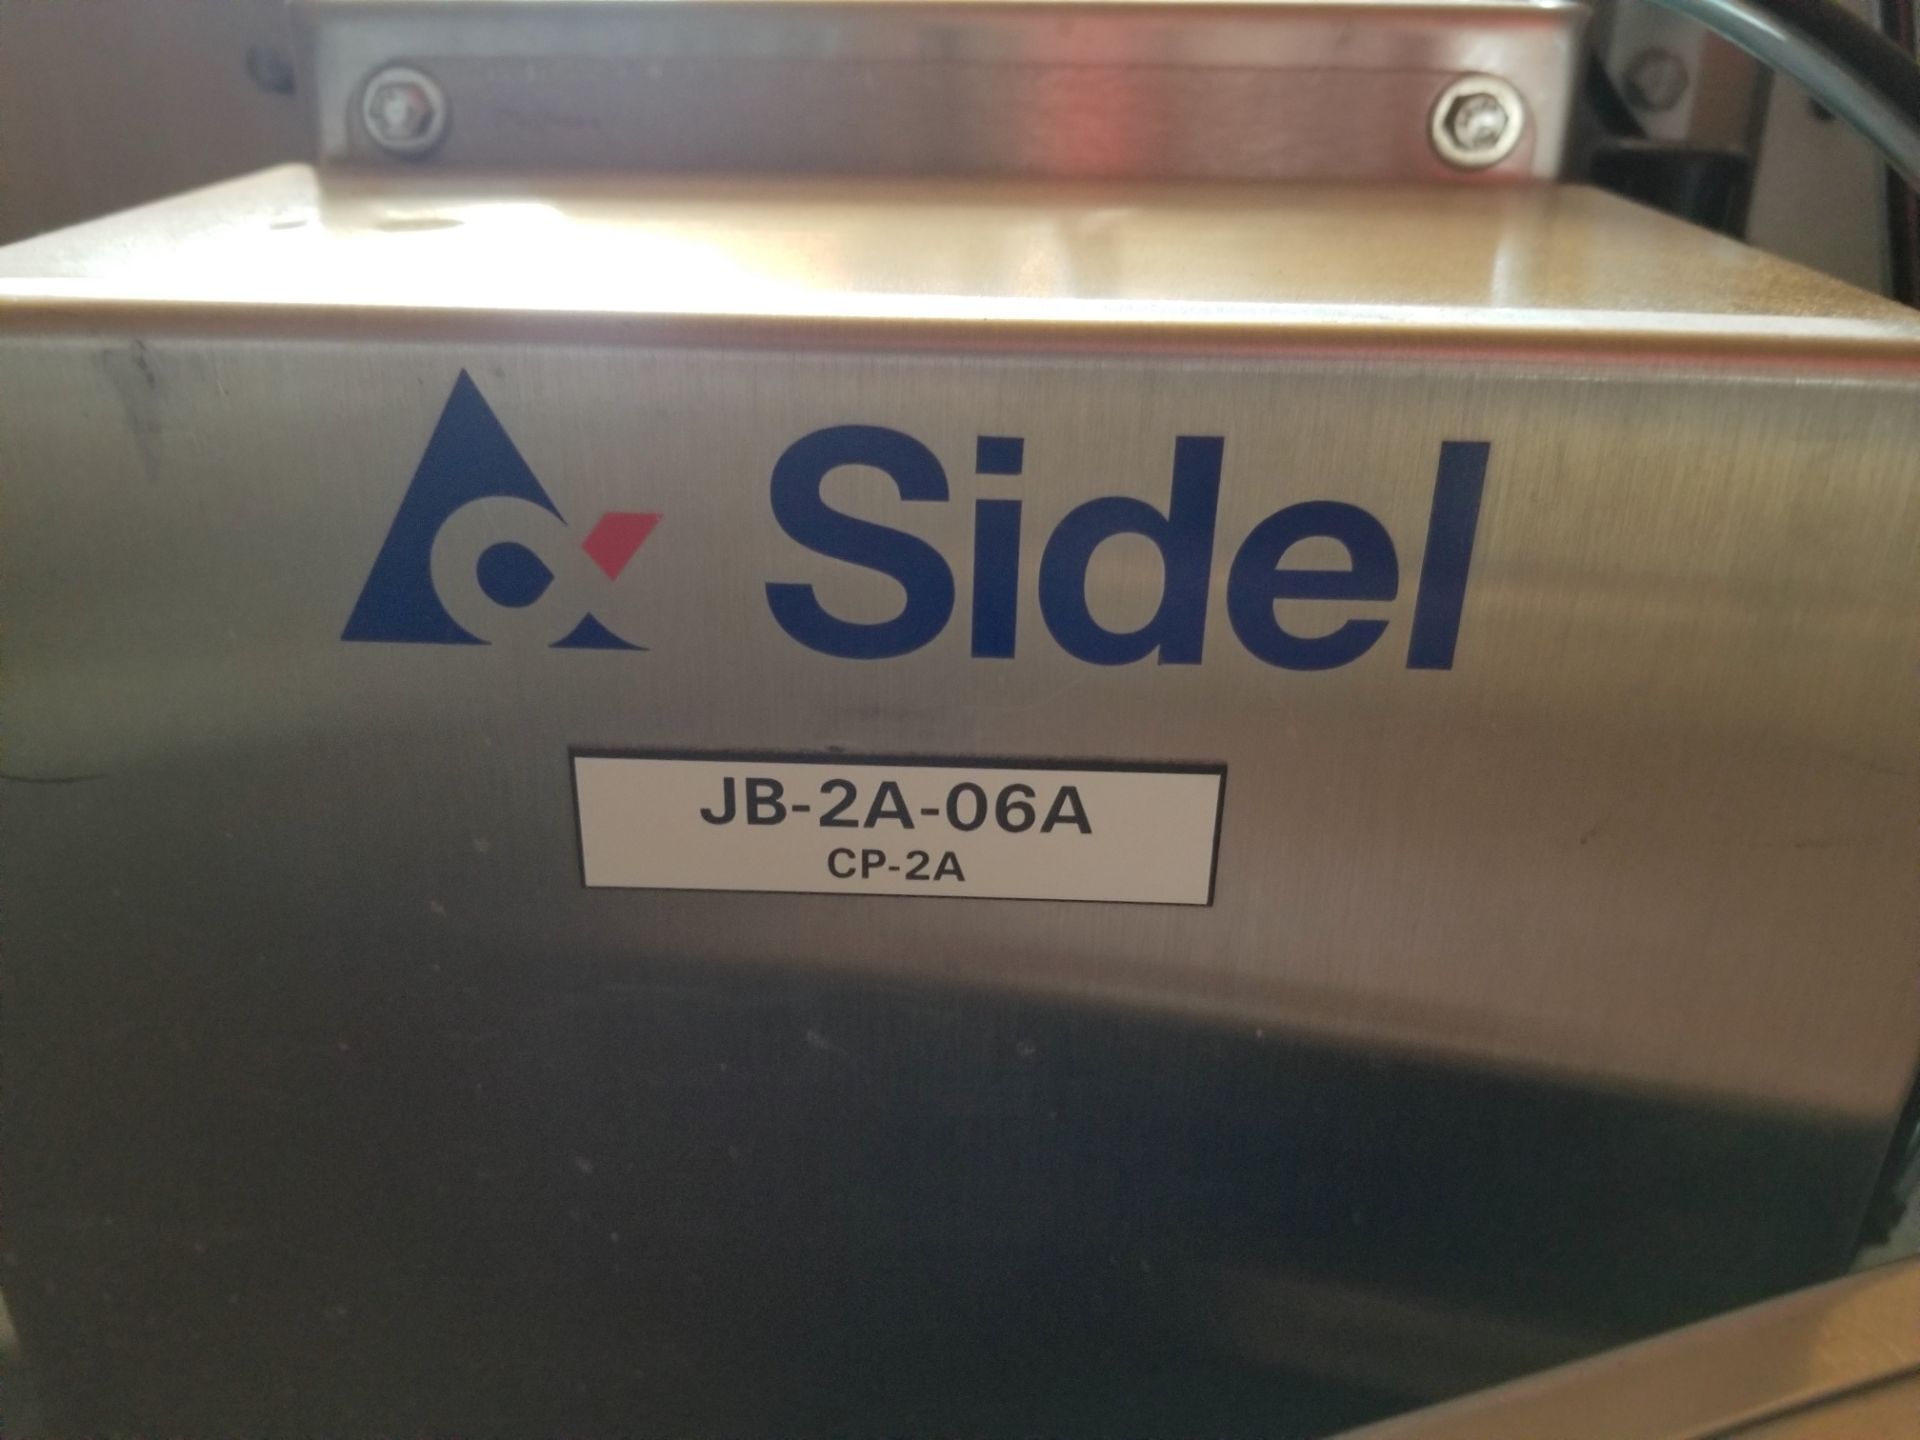 Approximately 50 feet of Stainless Steel Sidel Product Conveyor